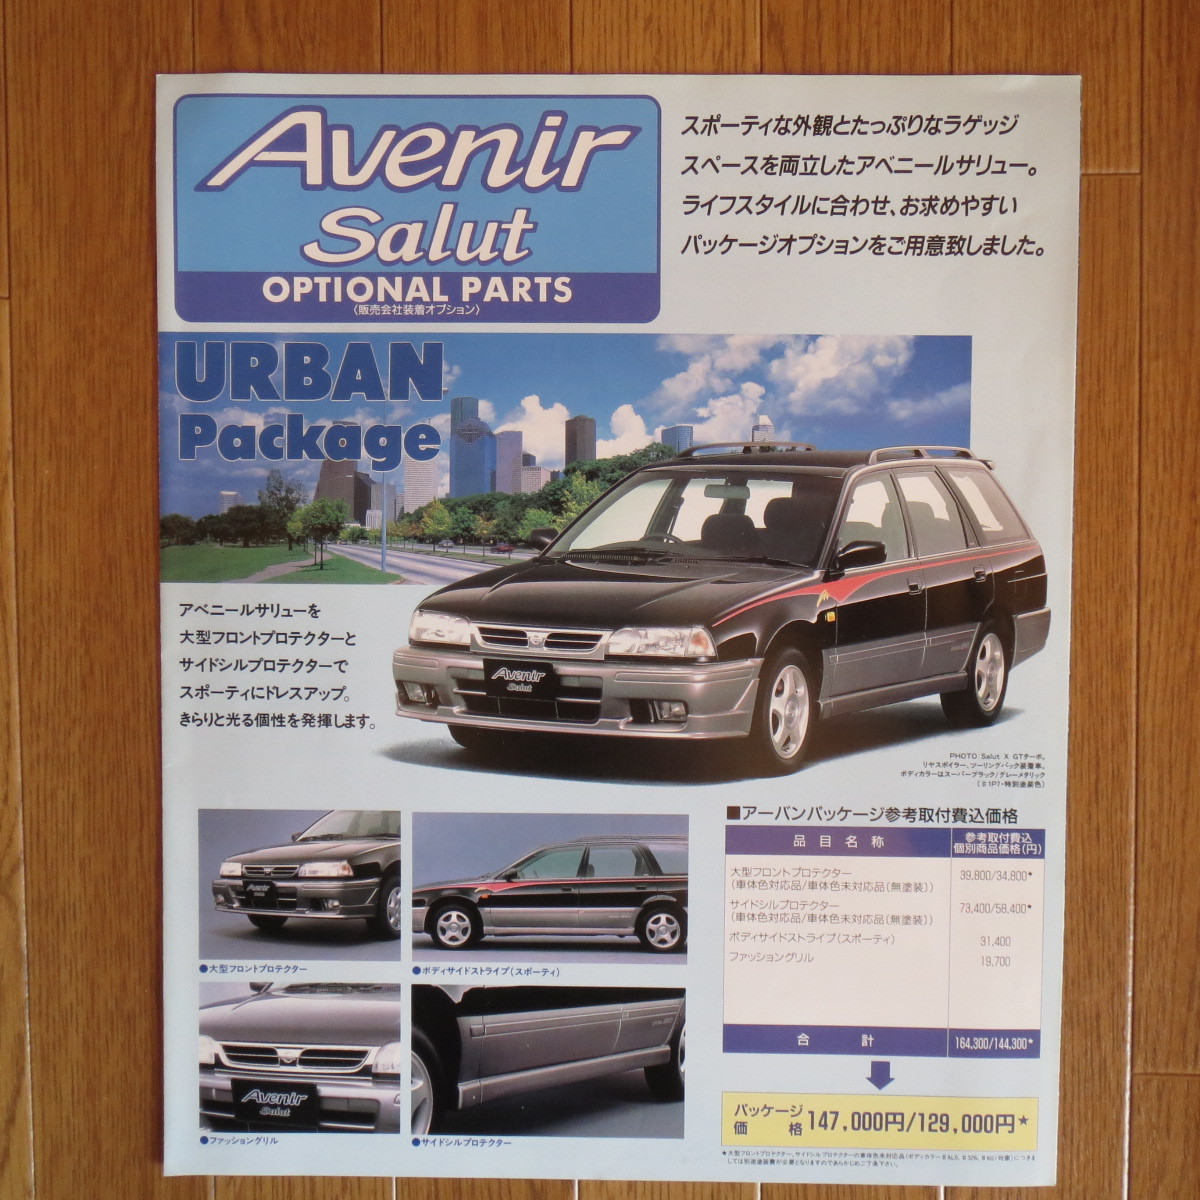  Avenir special edition 1994 year 1 month &1995 year 8 month catalog #cn01